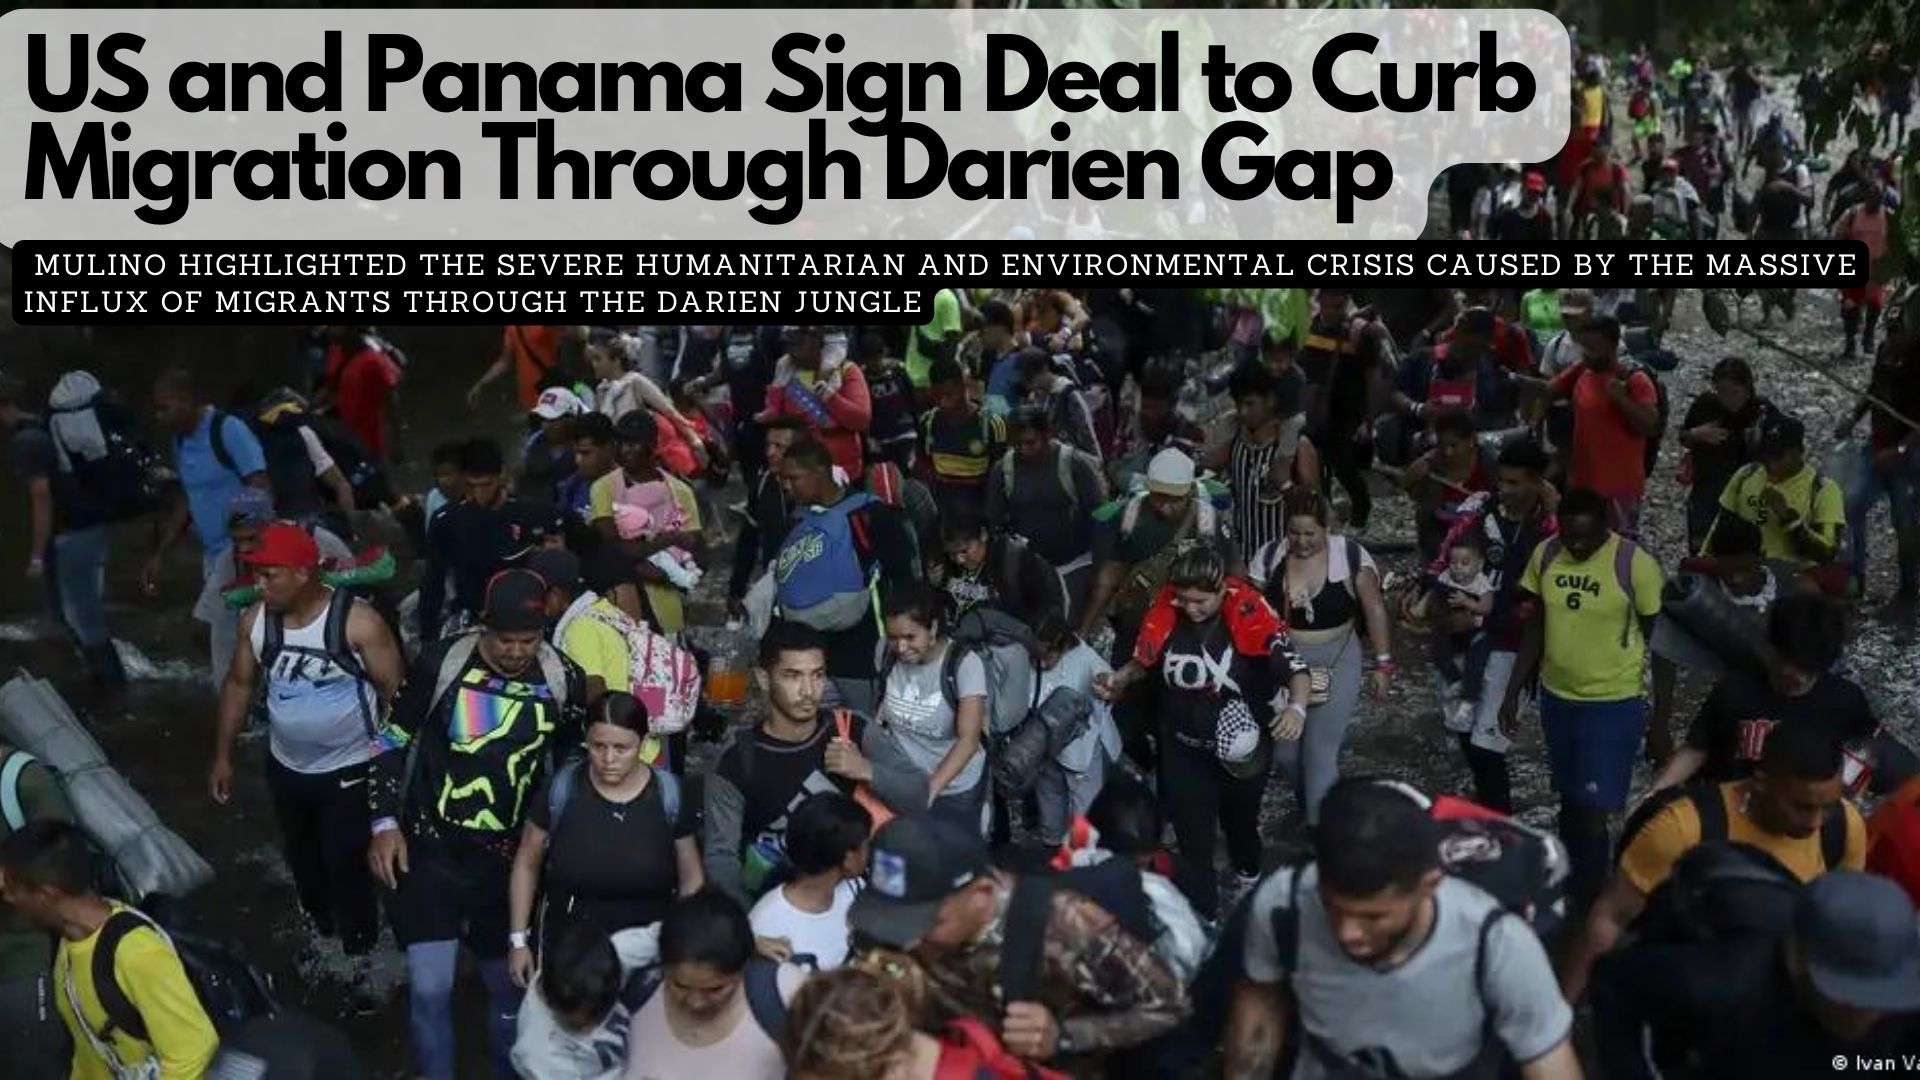 US and Panama Sign Deal to Curb Migration Through Darien Gap